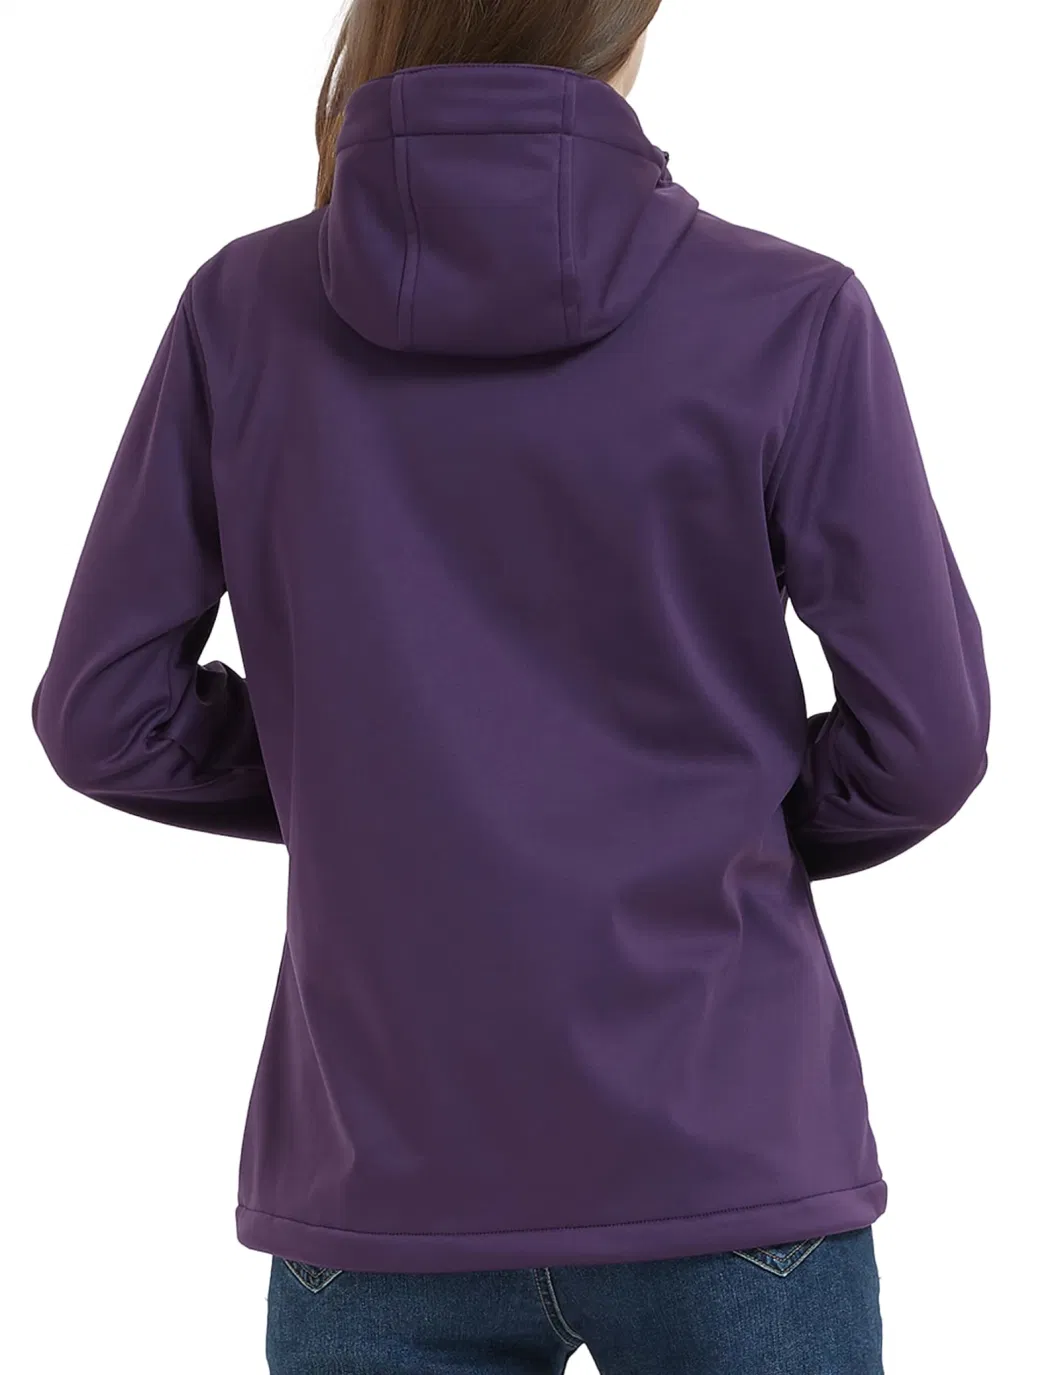 Asiapo China Factory Women&prime;s Purple Hiking Outdoor Gym Sports Softshell Jacket with Fleece Lined